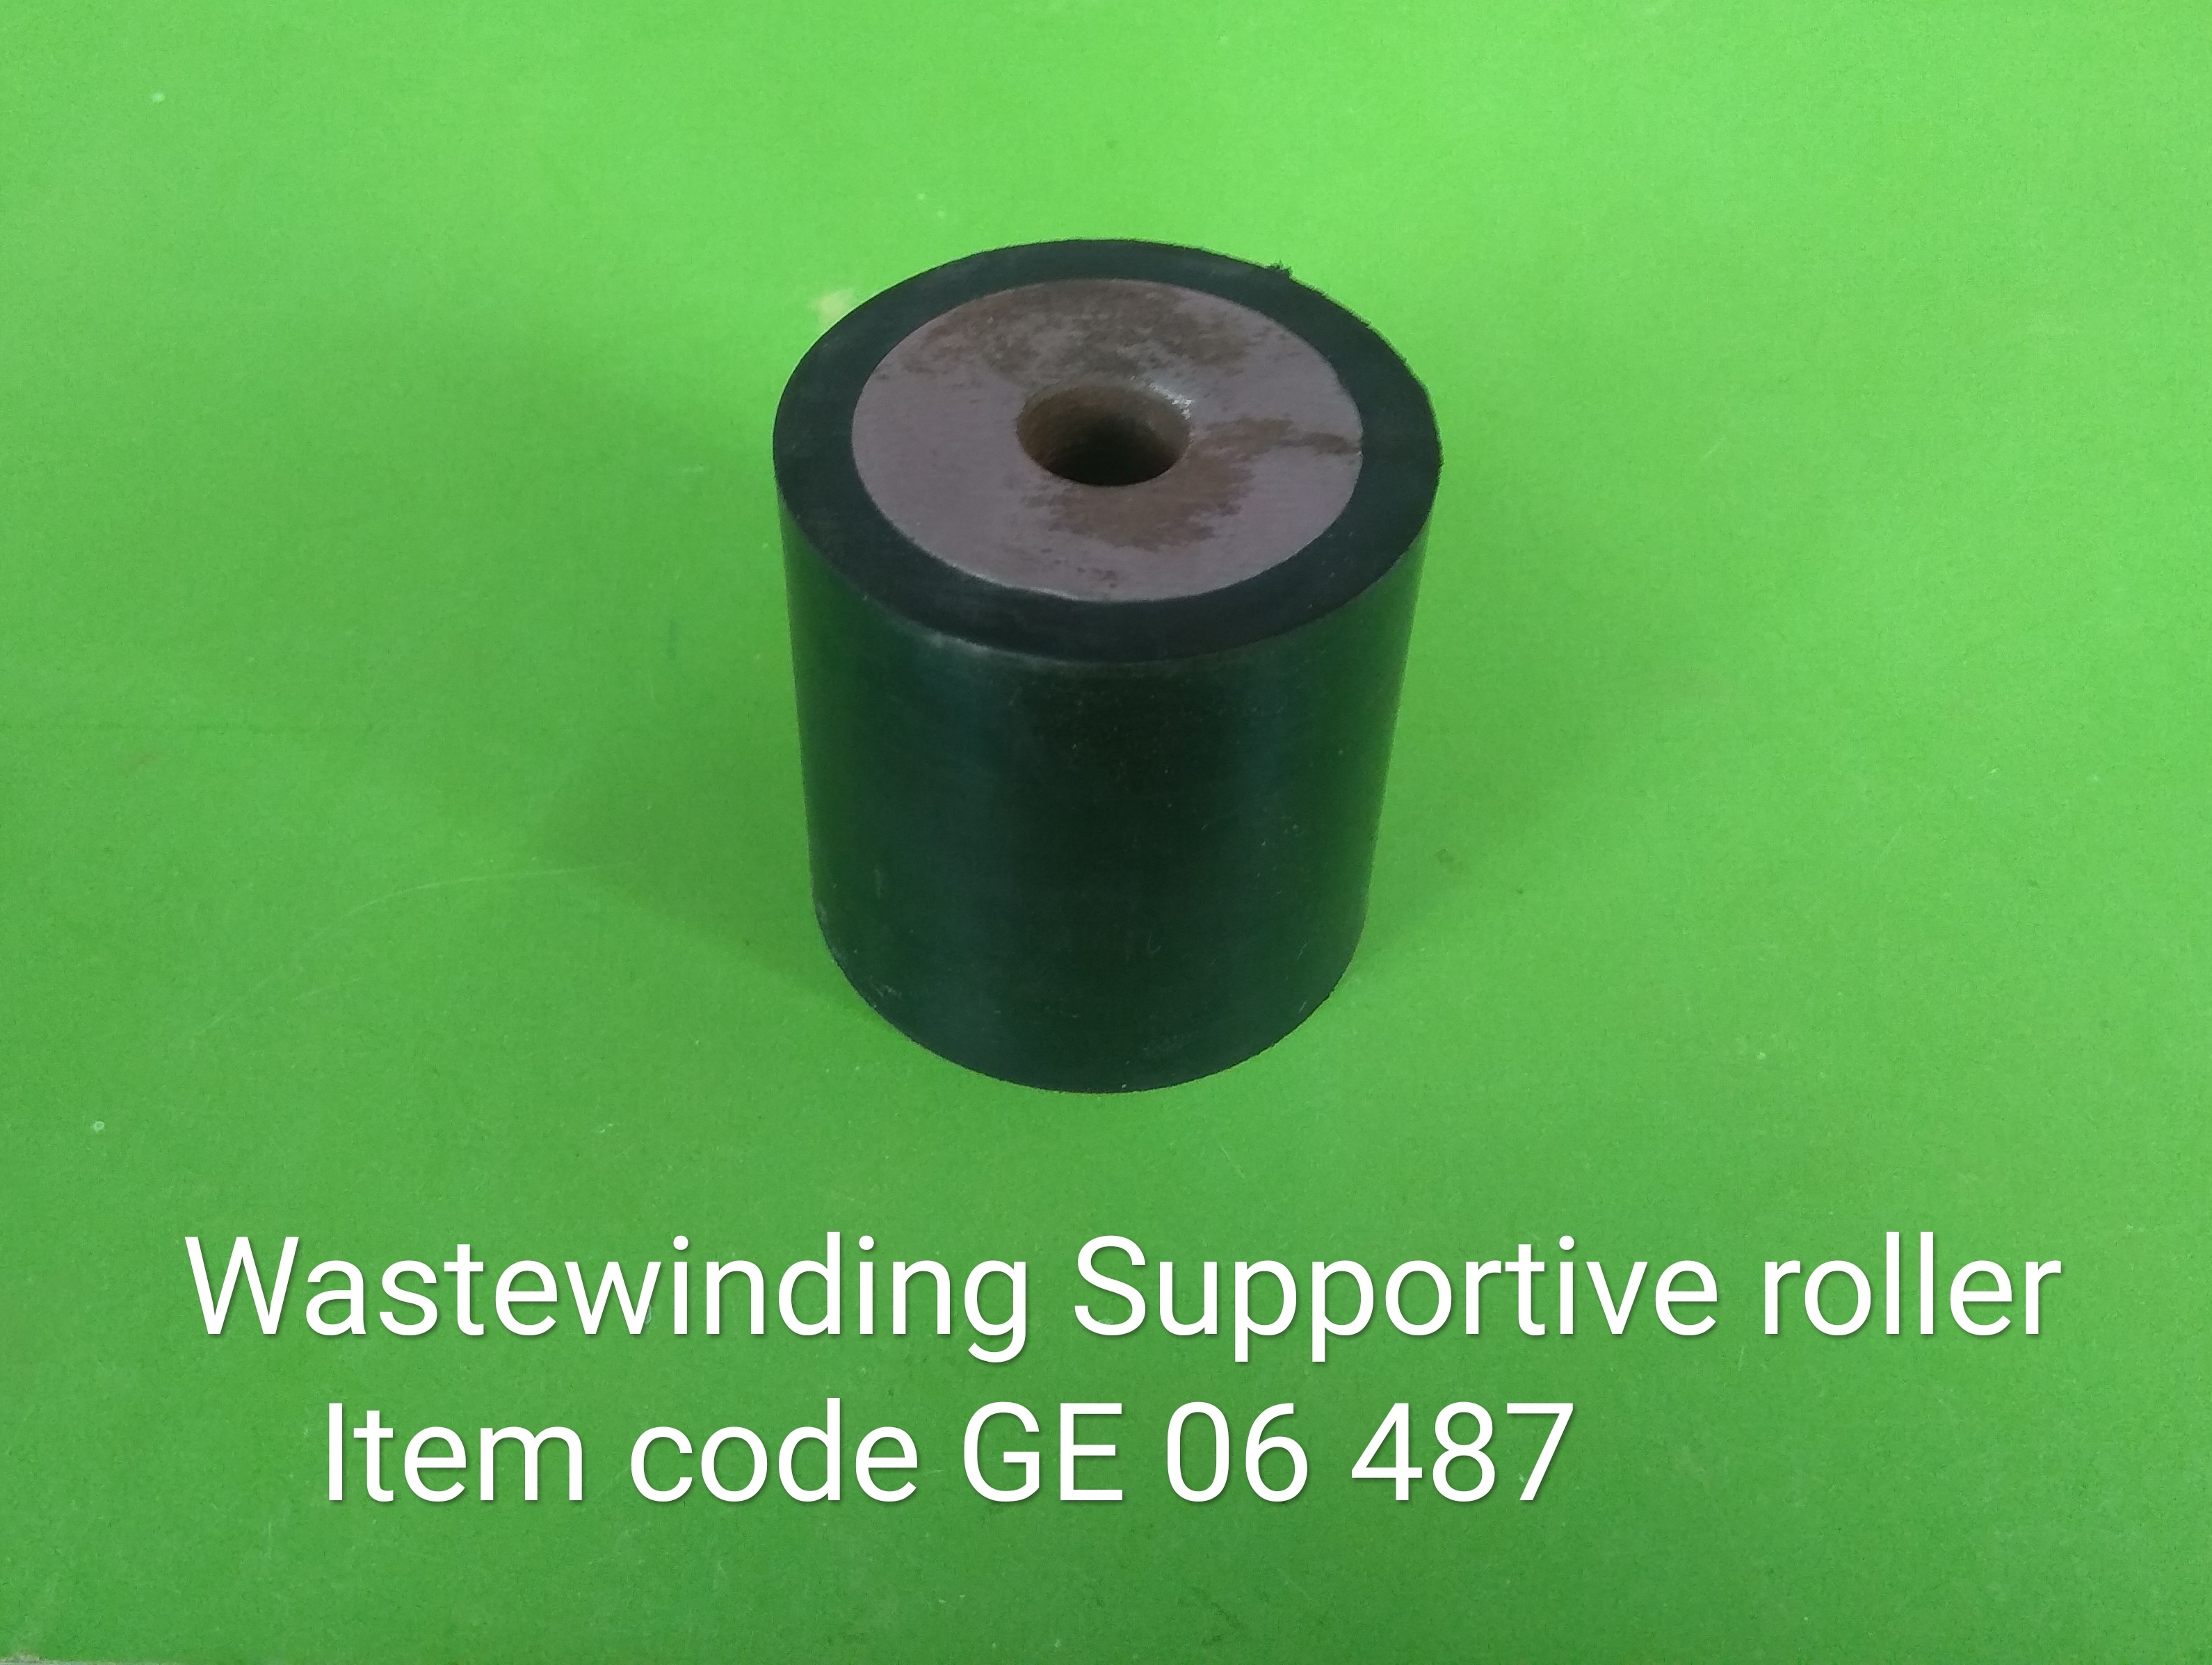 GE_06_487(SY)_Waste_Winding_Supportive_Roller_12MM_1_68.jpg